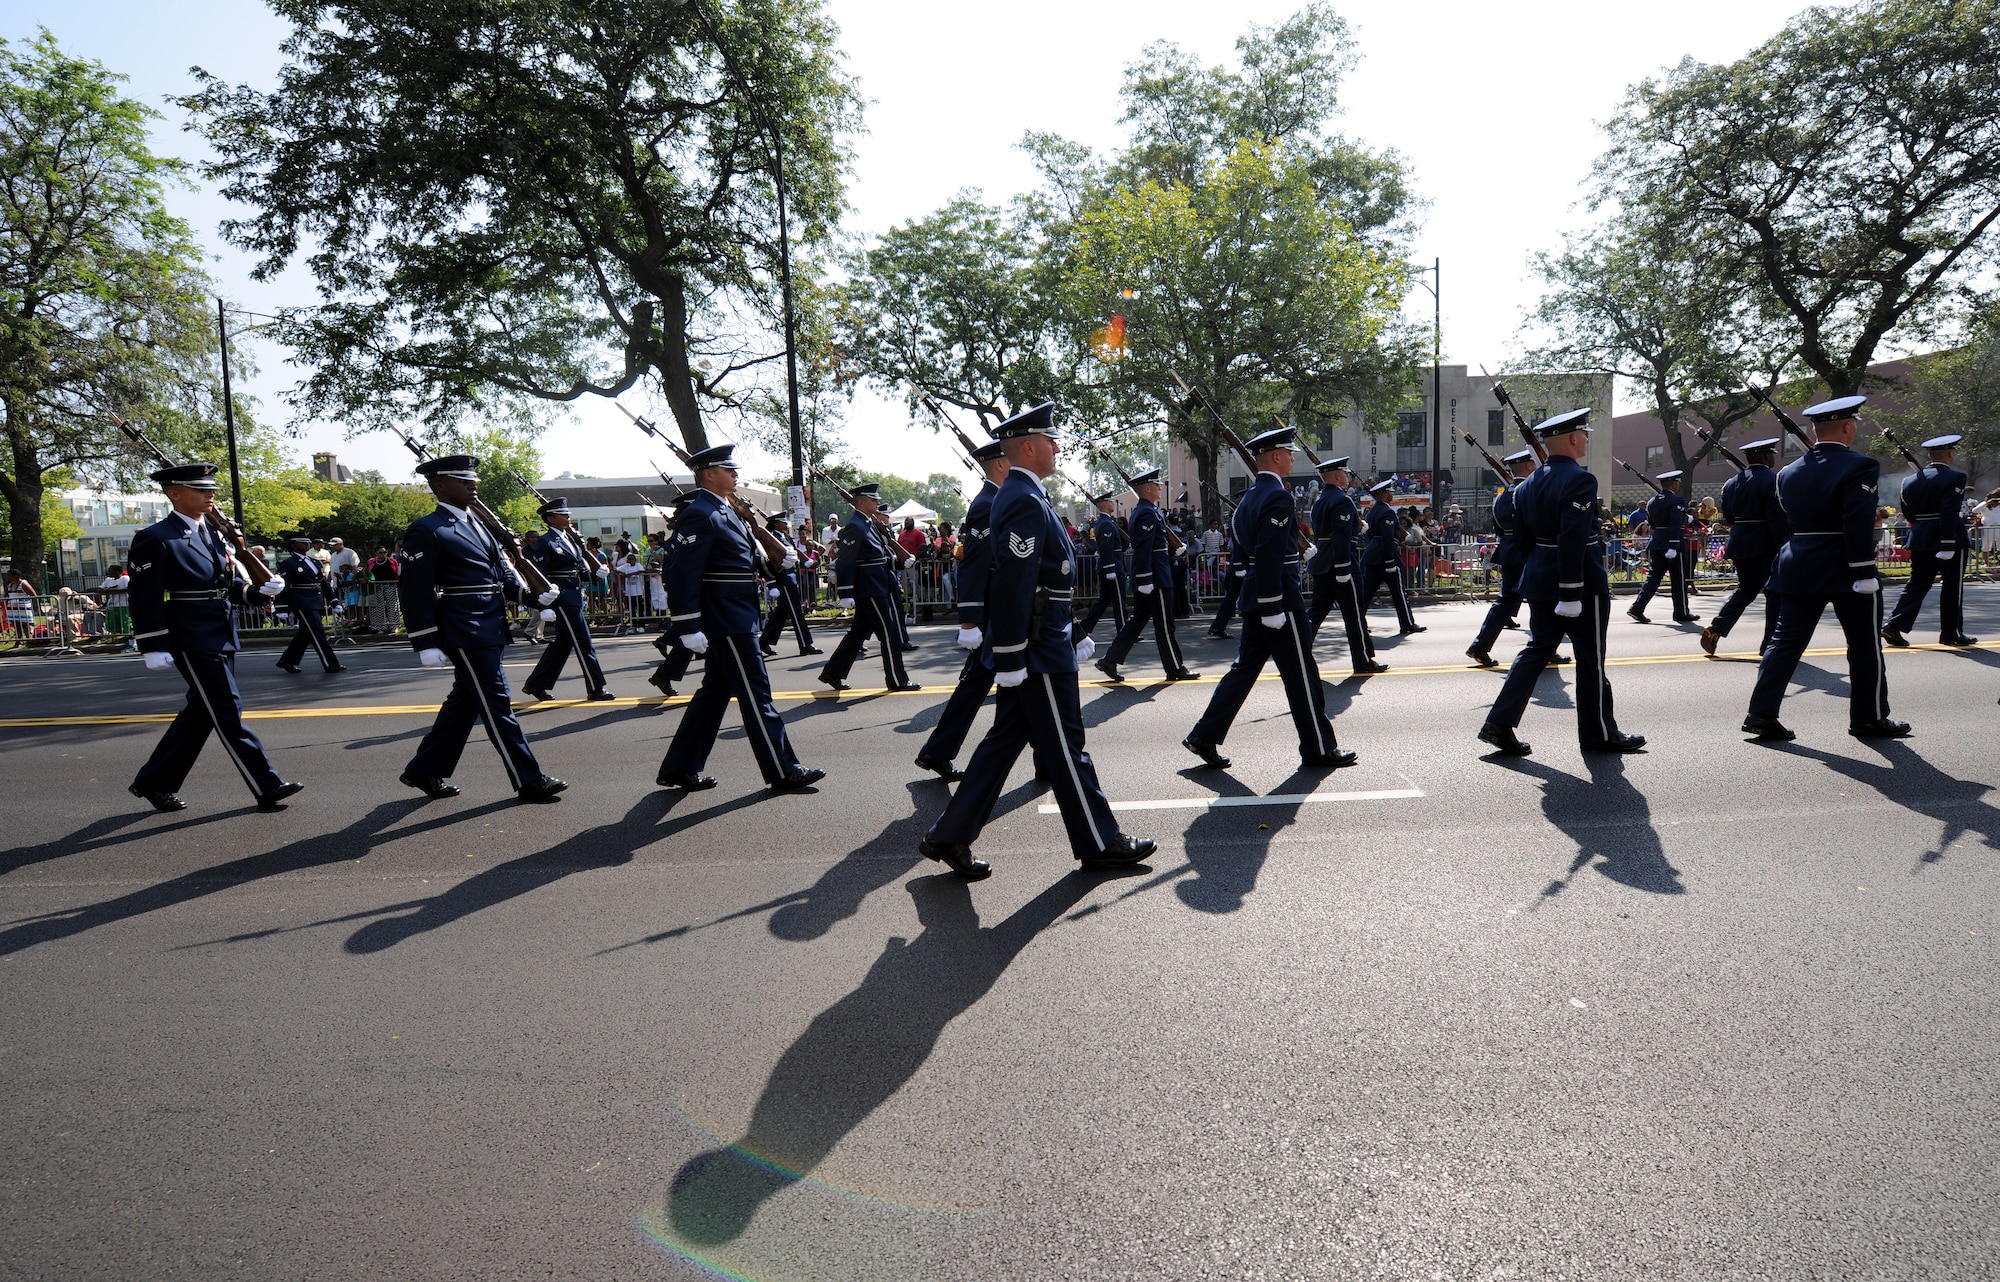 United States Air Force Honor Guard members march in front of approximately 1.5 attendees during the Bud Billiken Parade in Chicago, Il., August 9, 2014.  The parade has been an annual Chicago event since 1929. (U.S. Air Force photo/ Senior Airman Nesha Humes)